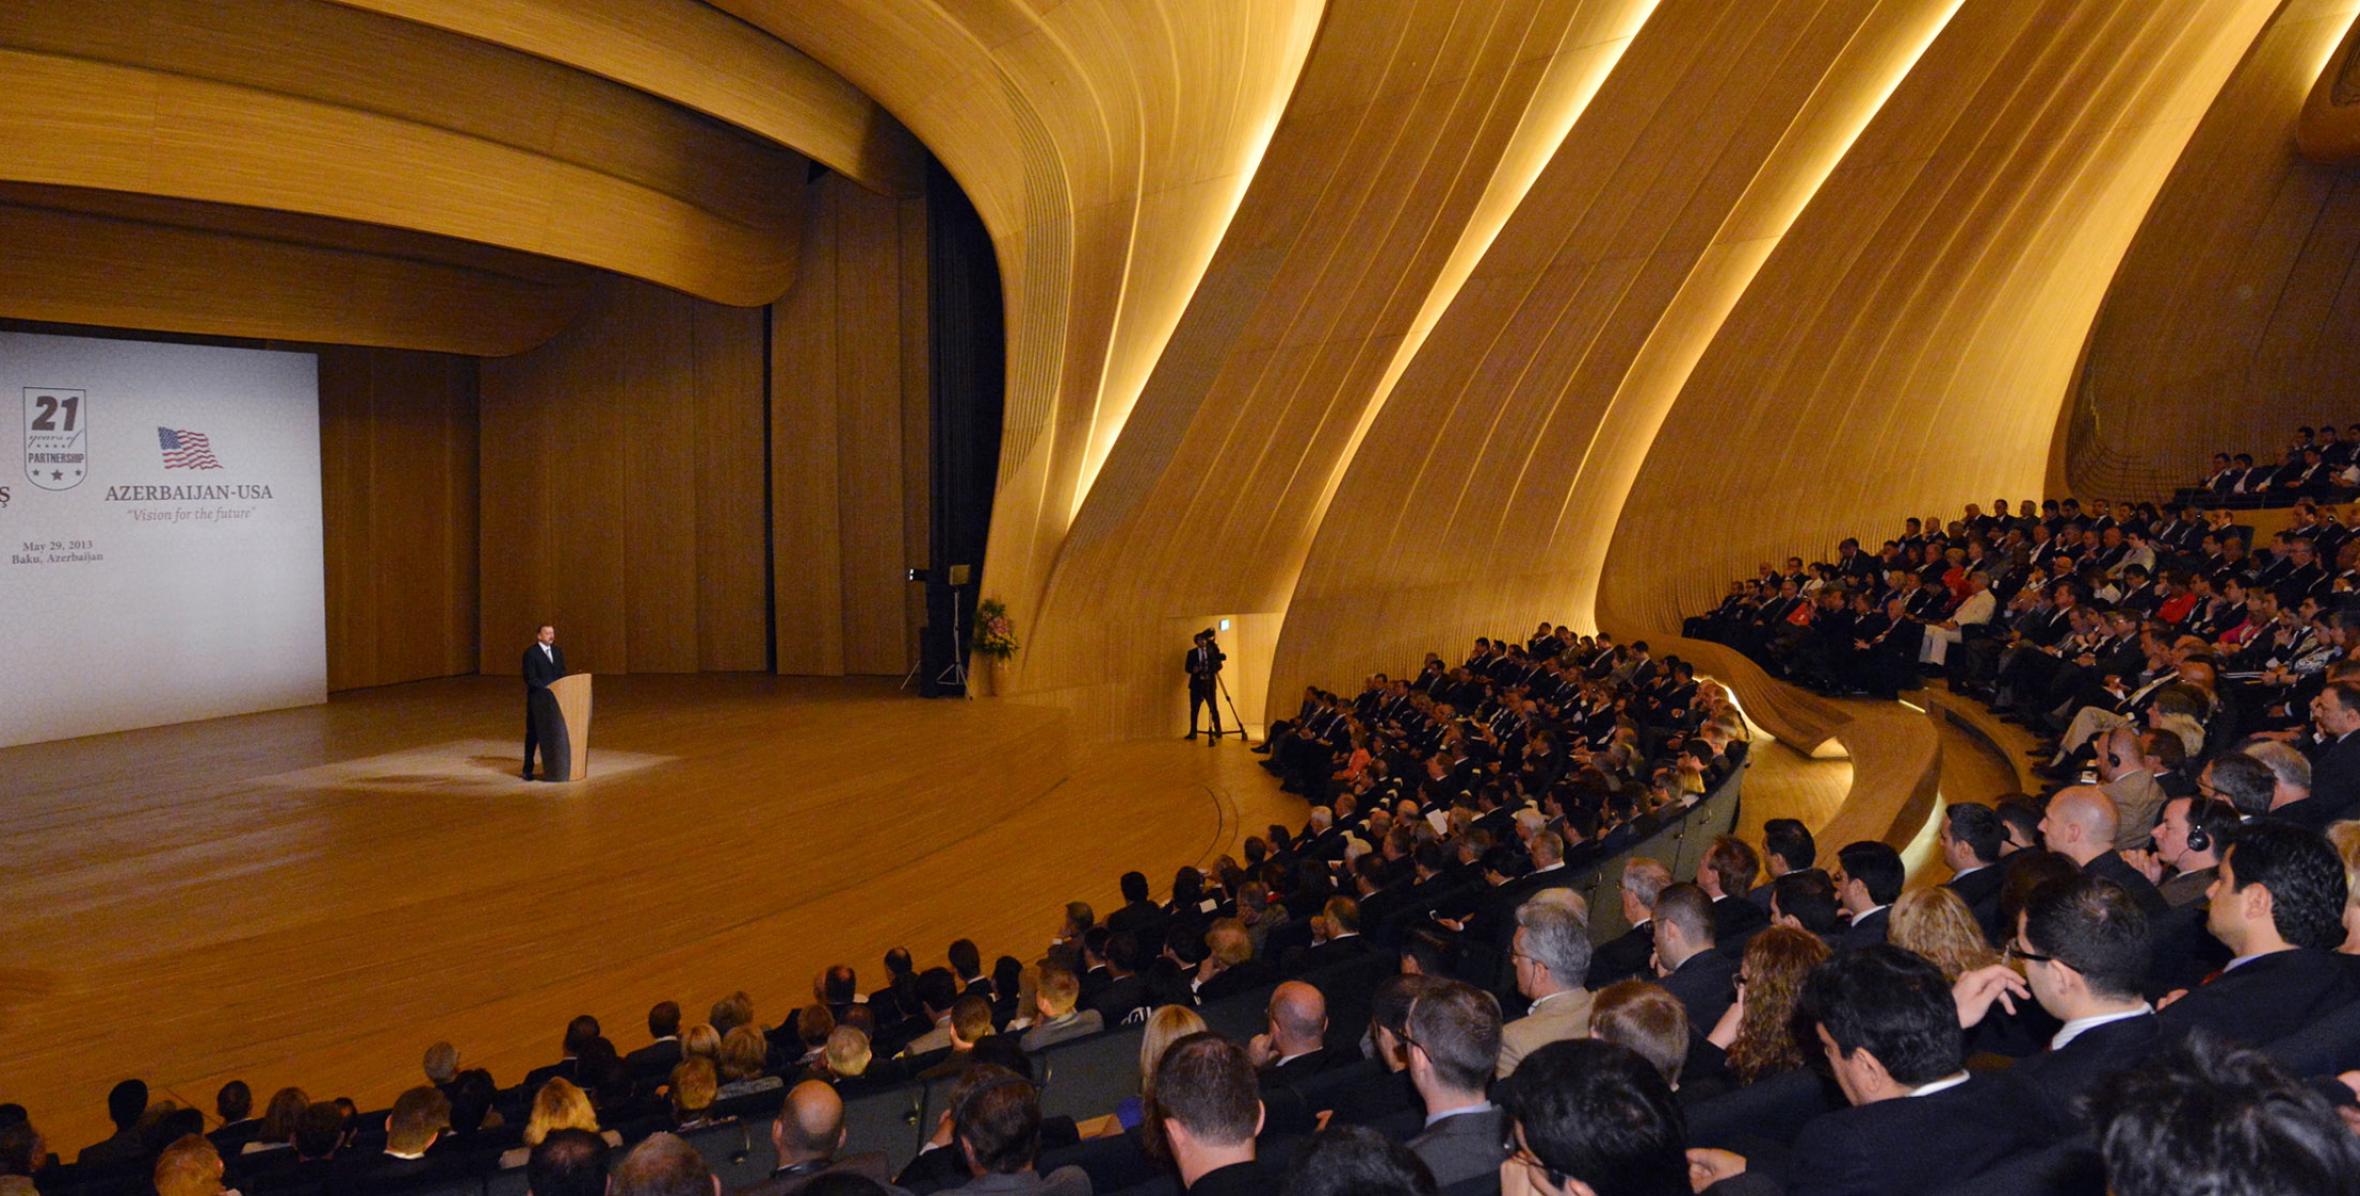 Ilham Aliyev attended the opening of the Azerbaijan-USA forum “Vision for the Future” in Baku